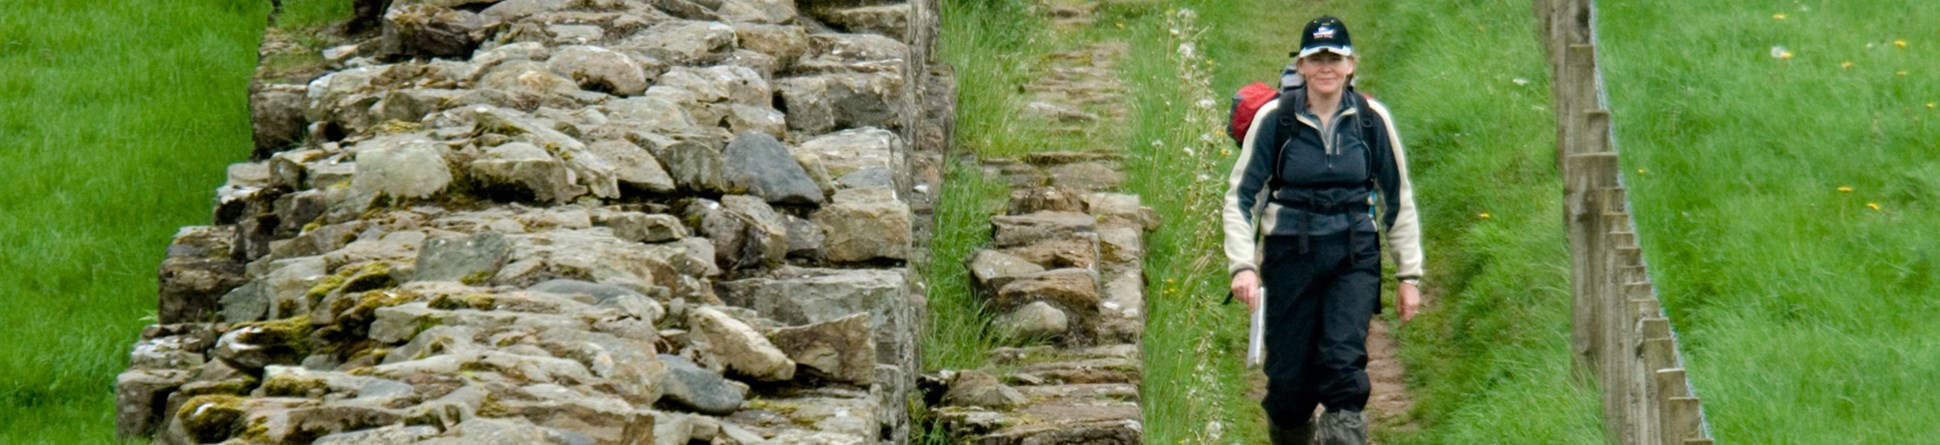 A hiker with a map walks along a trail beside a ruined Roman wall.